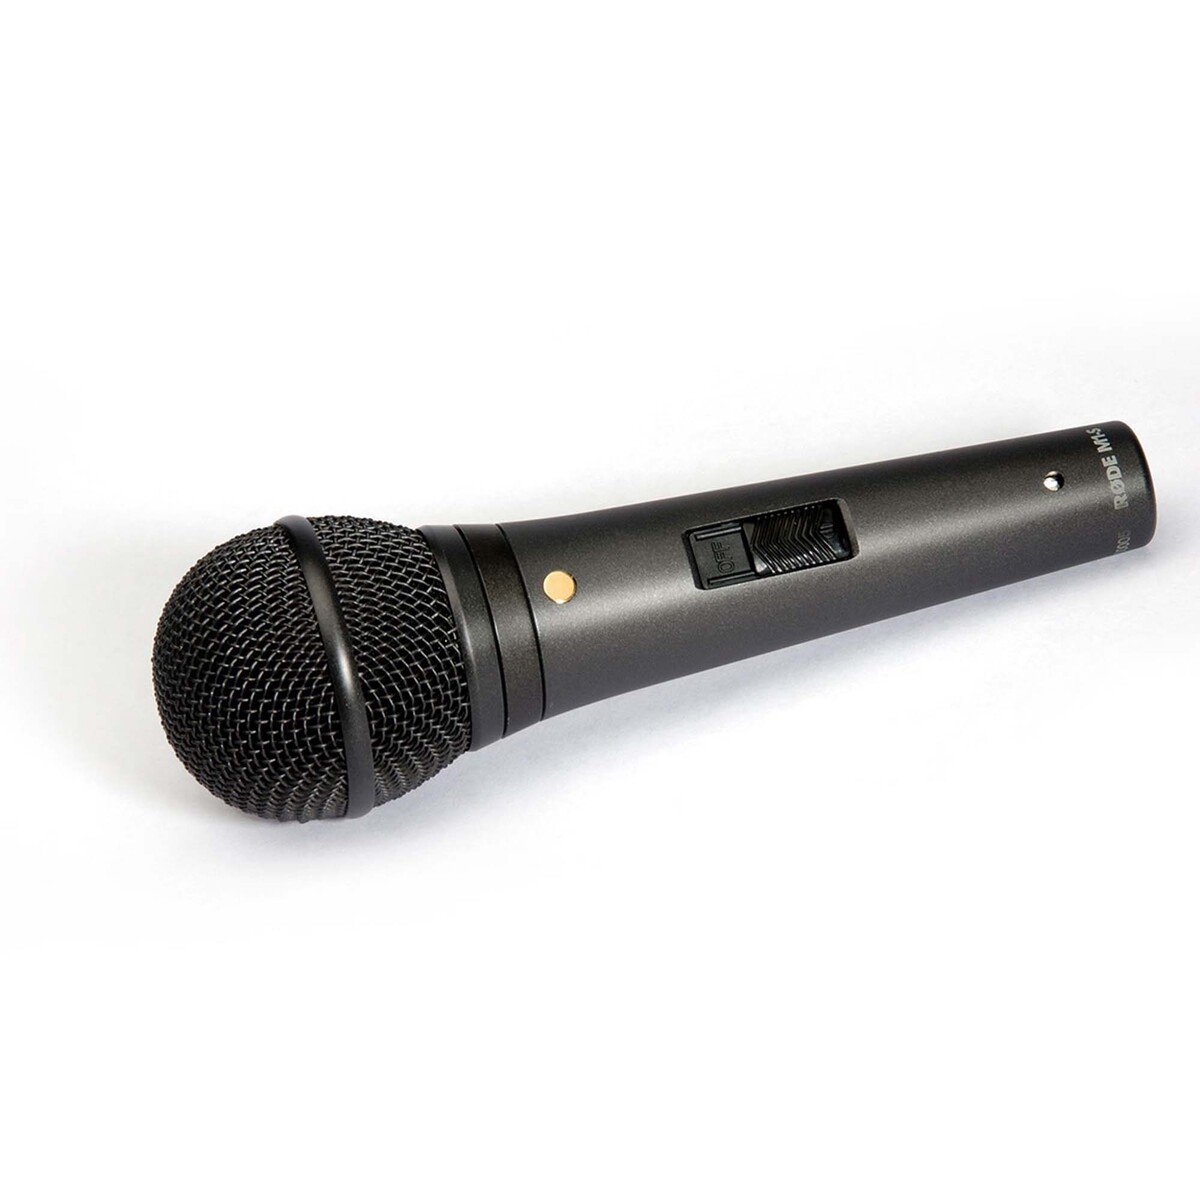 Rode M1-S Live Performance Dynamic Microphone with Lockable Switch